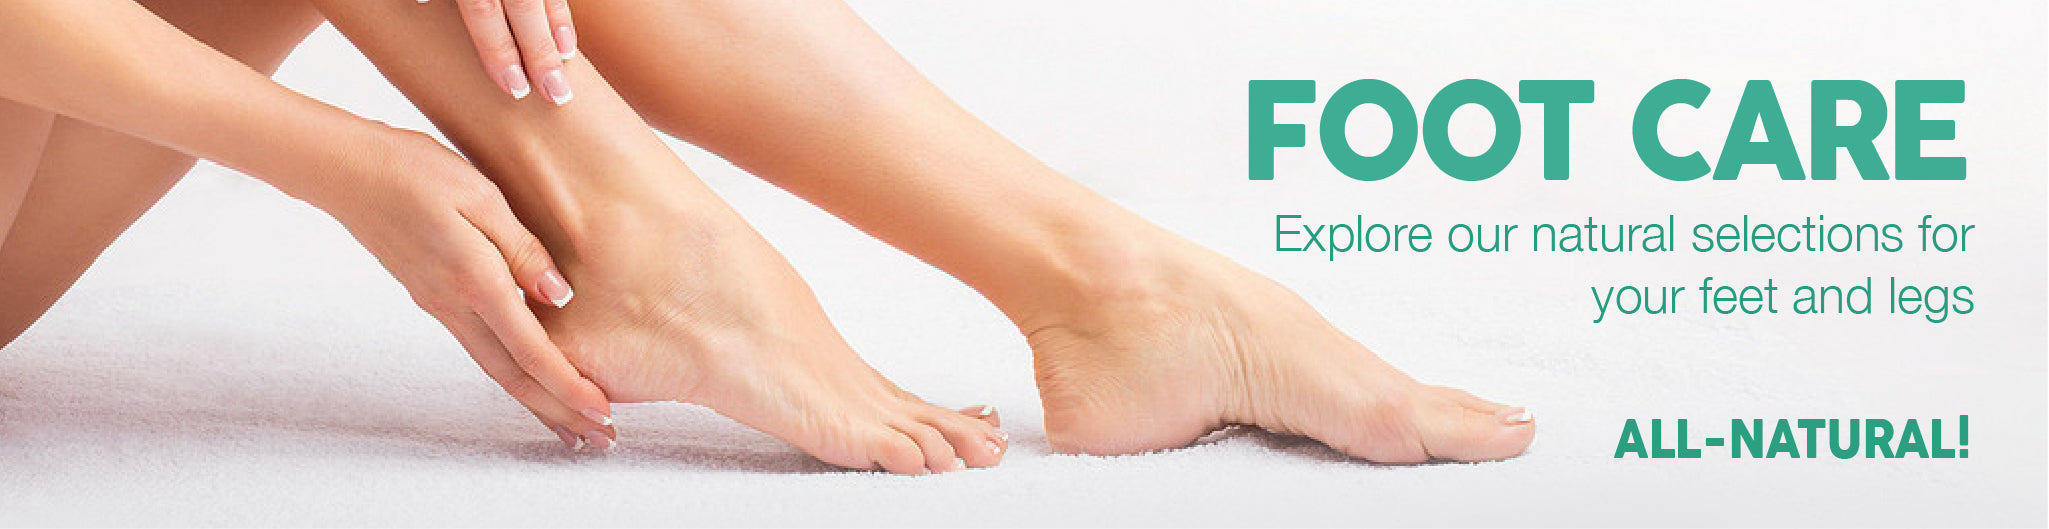 Footcare Products - Relieve Foot Pain & Leg Pain